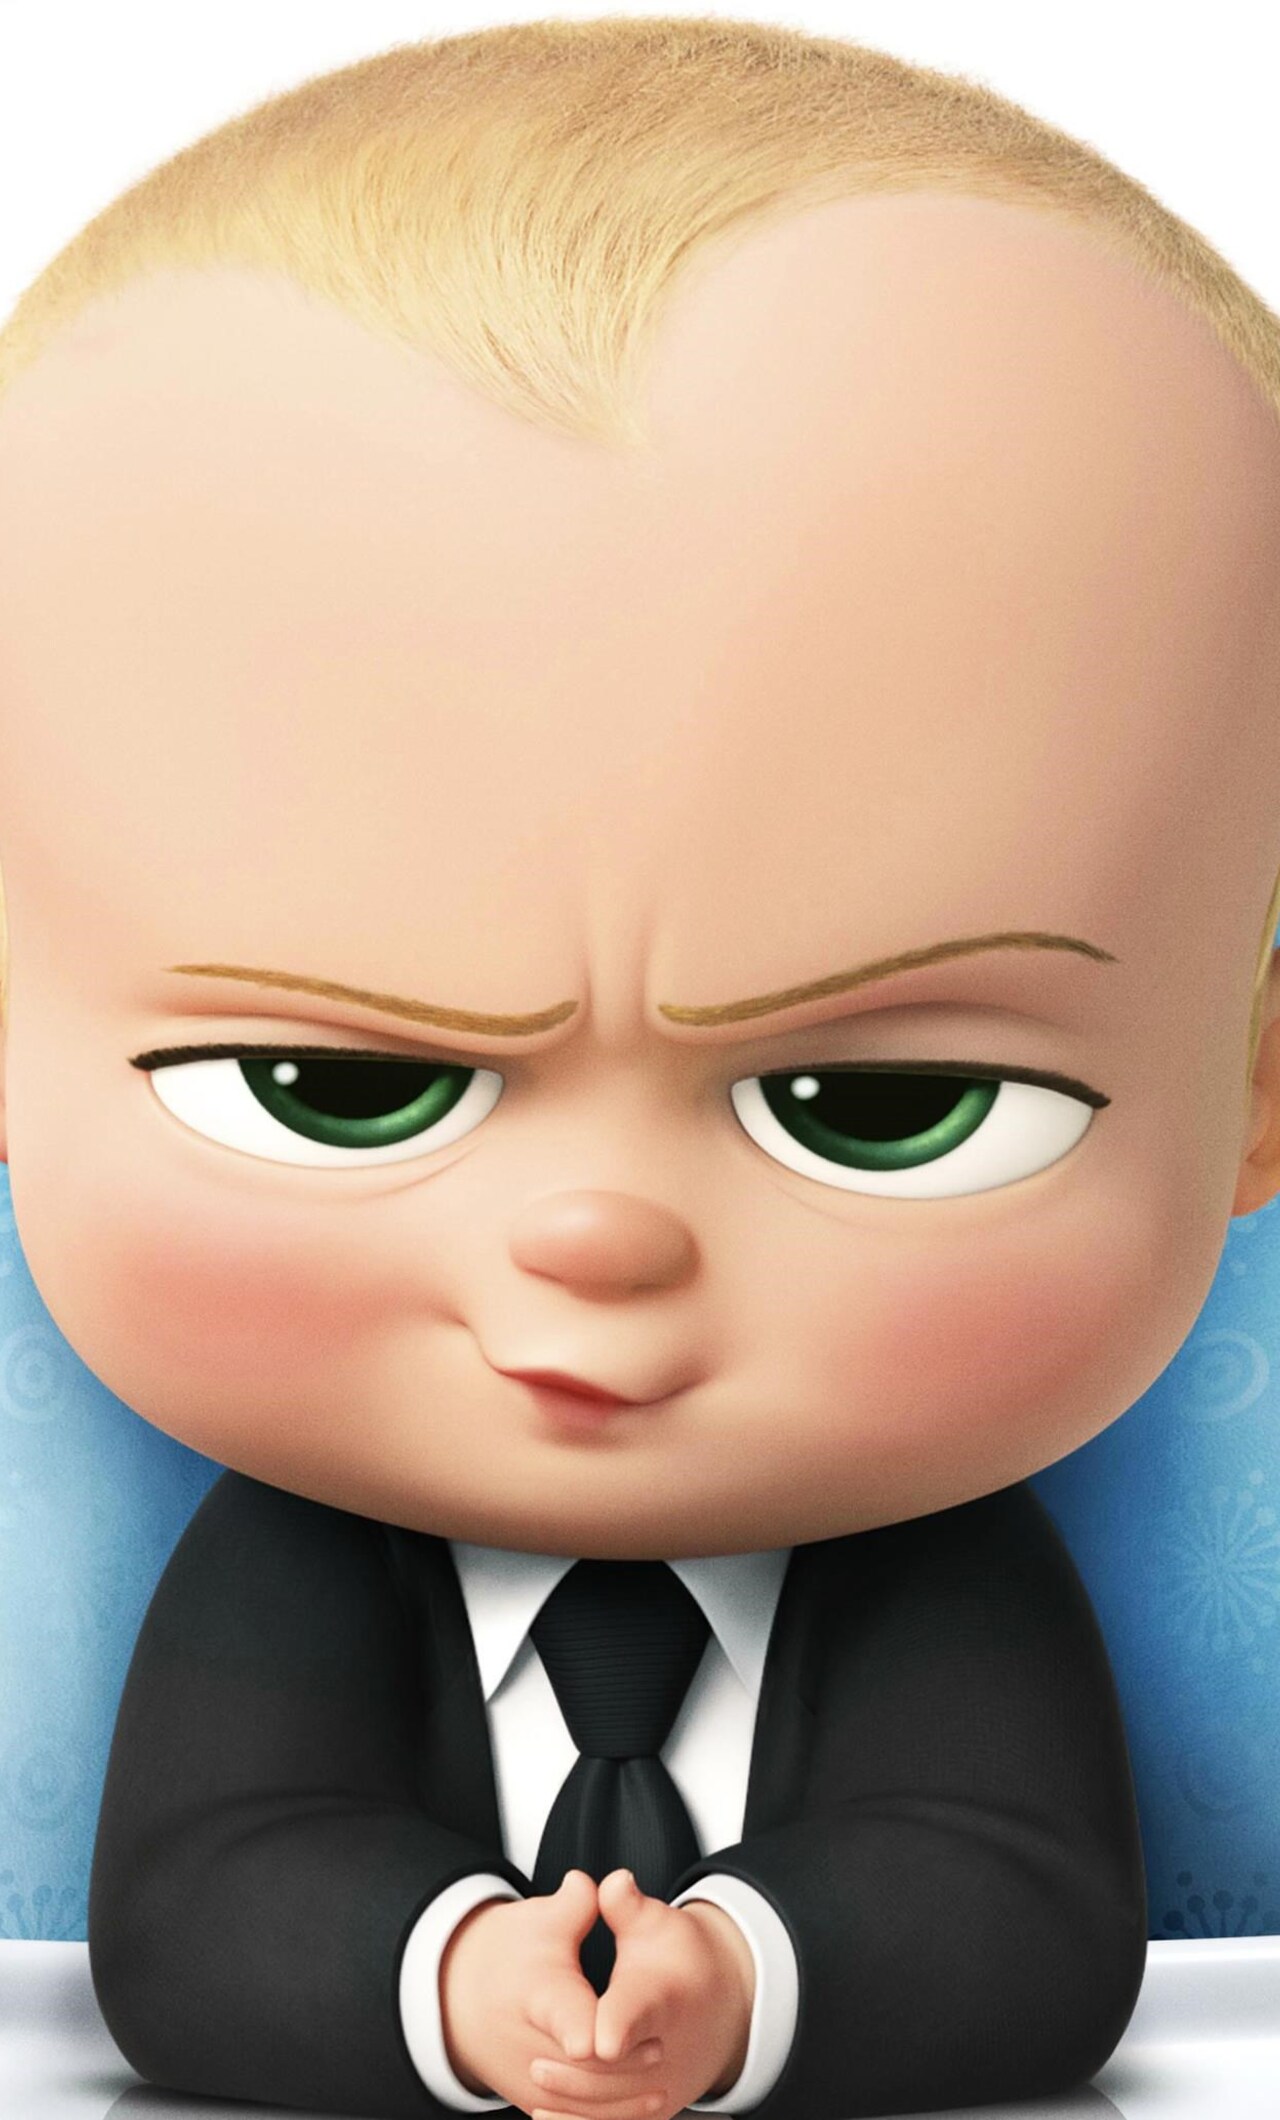 Baby Boss Background Hd - Outfit Ideas for You